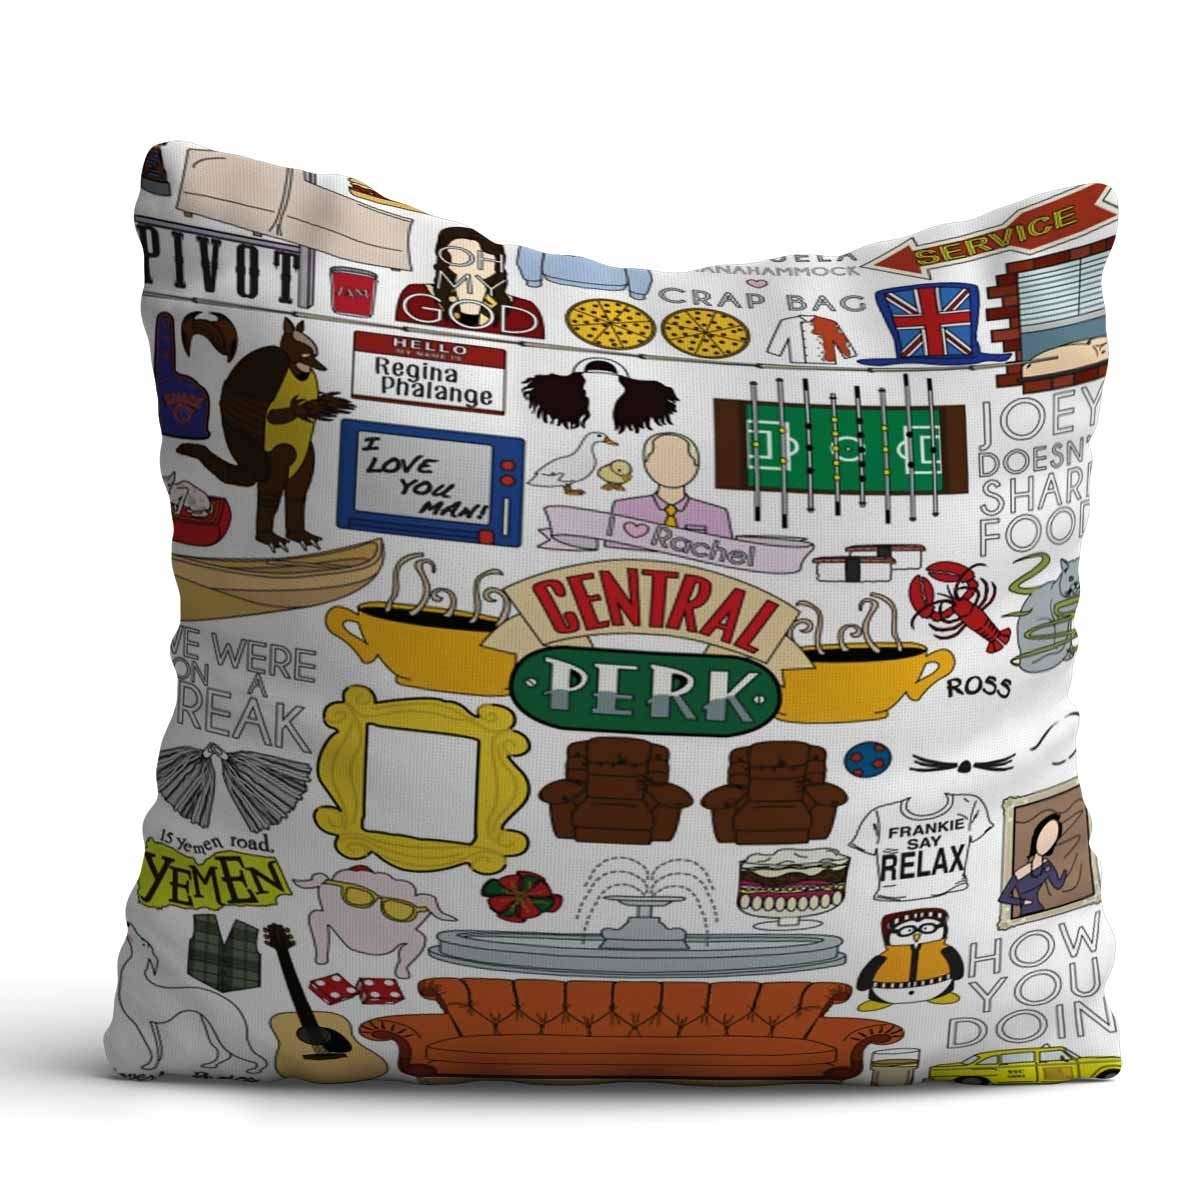 A pillow with Friends references on it